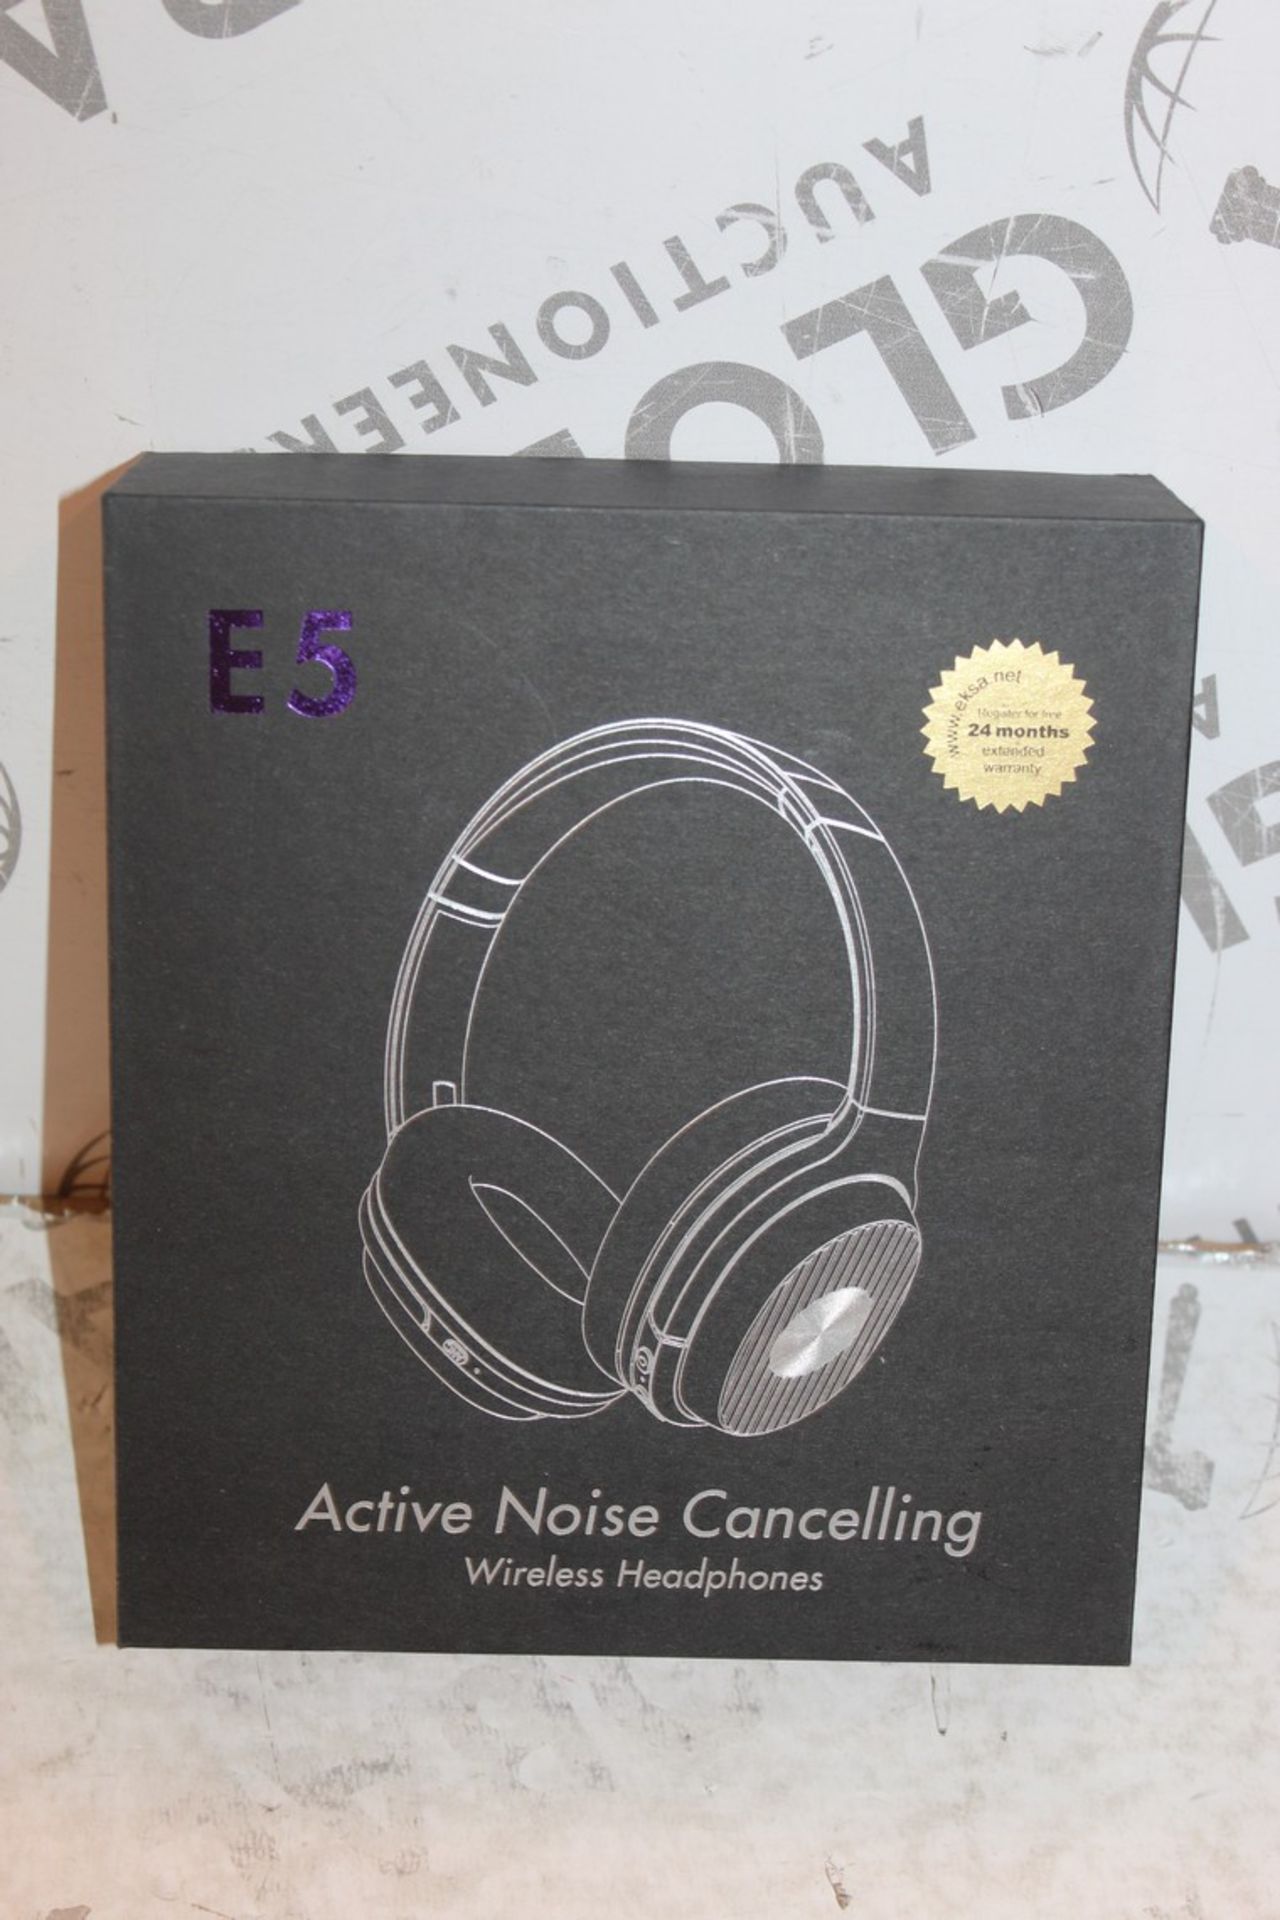 Boxed Pair Of E5 Active Noise Cancelling Wireless Headphones RRP £50 (Appraisals Available Upon